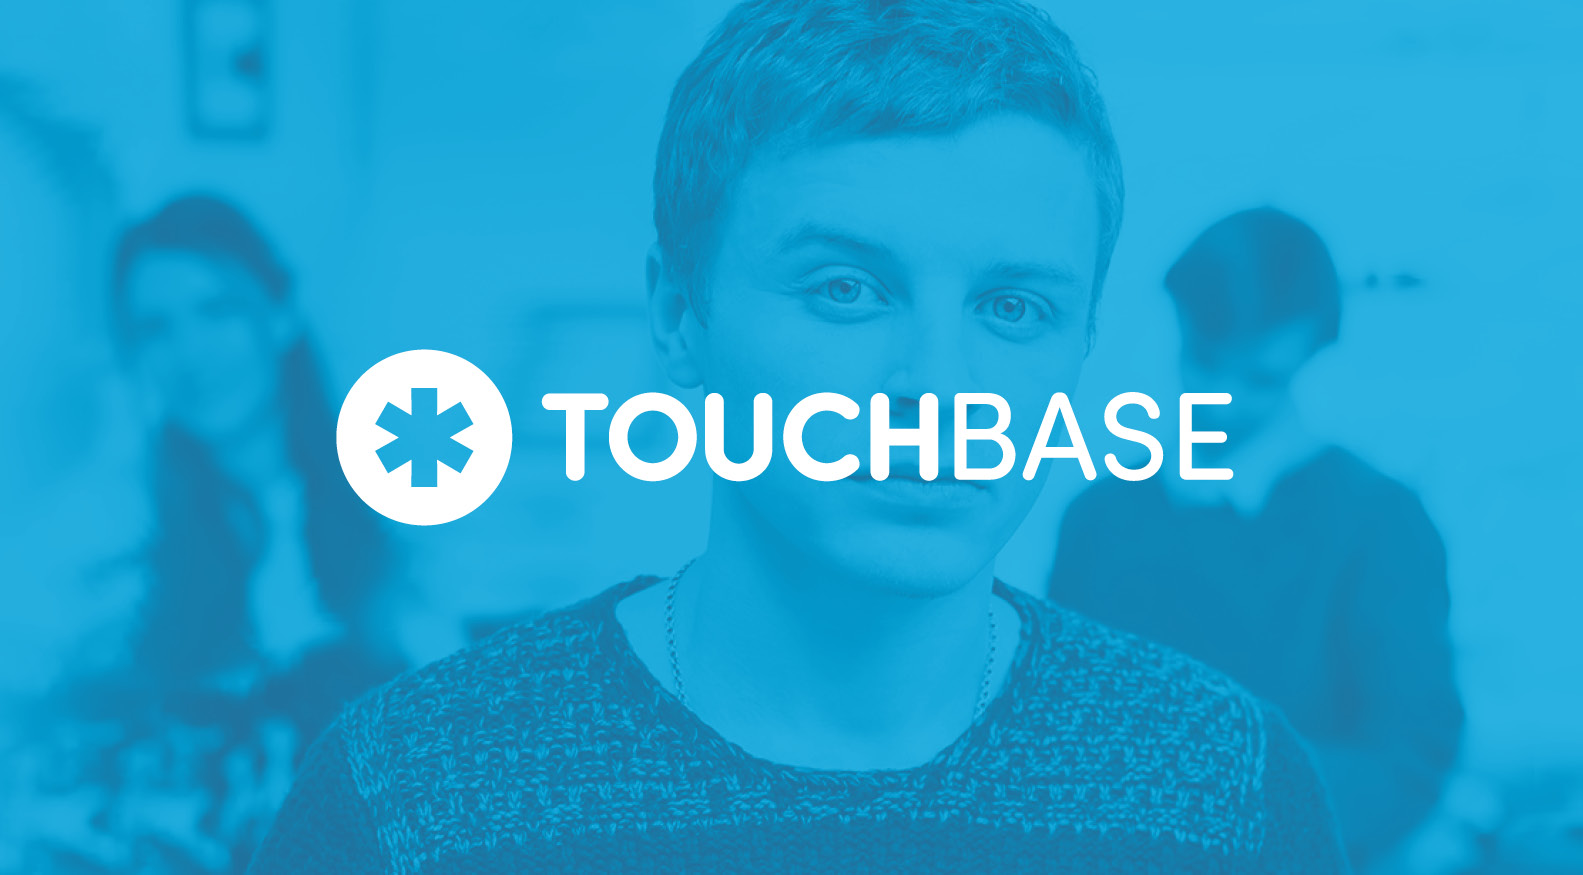 TouchBase: a new resource on drug use in the LGBTI community